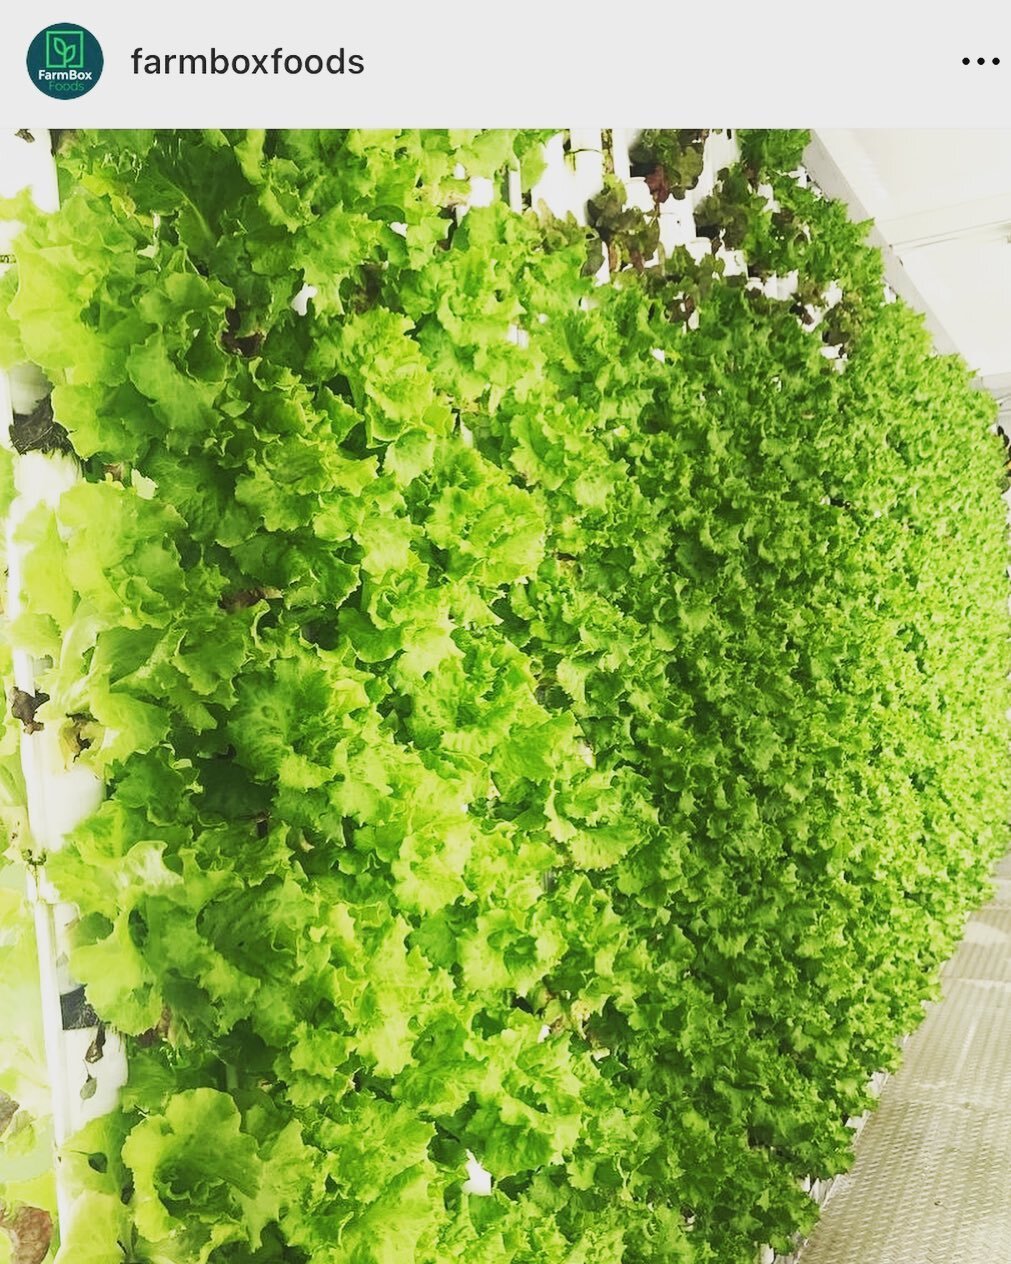 Our container is here and before you know it we will have amazing greens and herbs ready for YOU!  Only a few weeks left to get your end of year donations in, link in profile!  #citygreens #hydroponics #community #hyperlocalproduce #urbanfarming